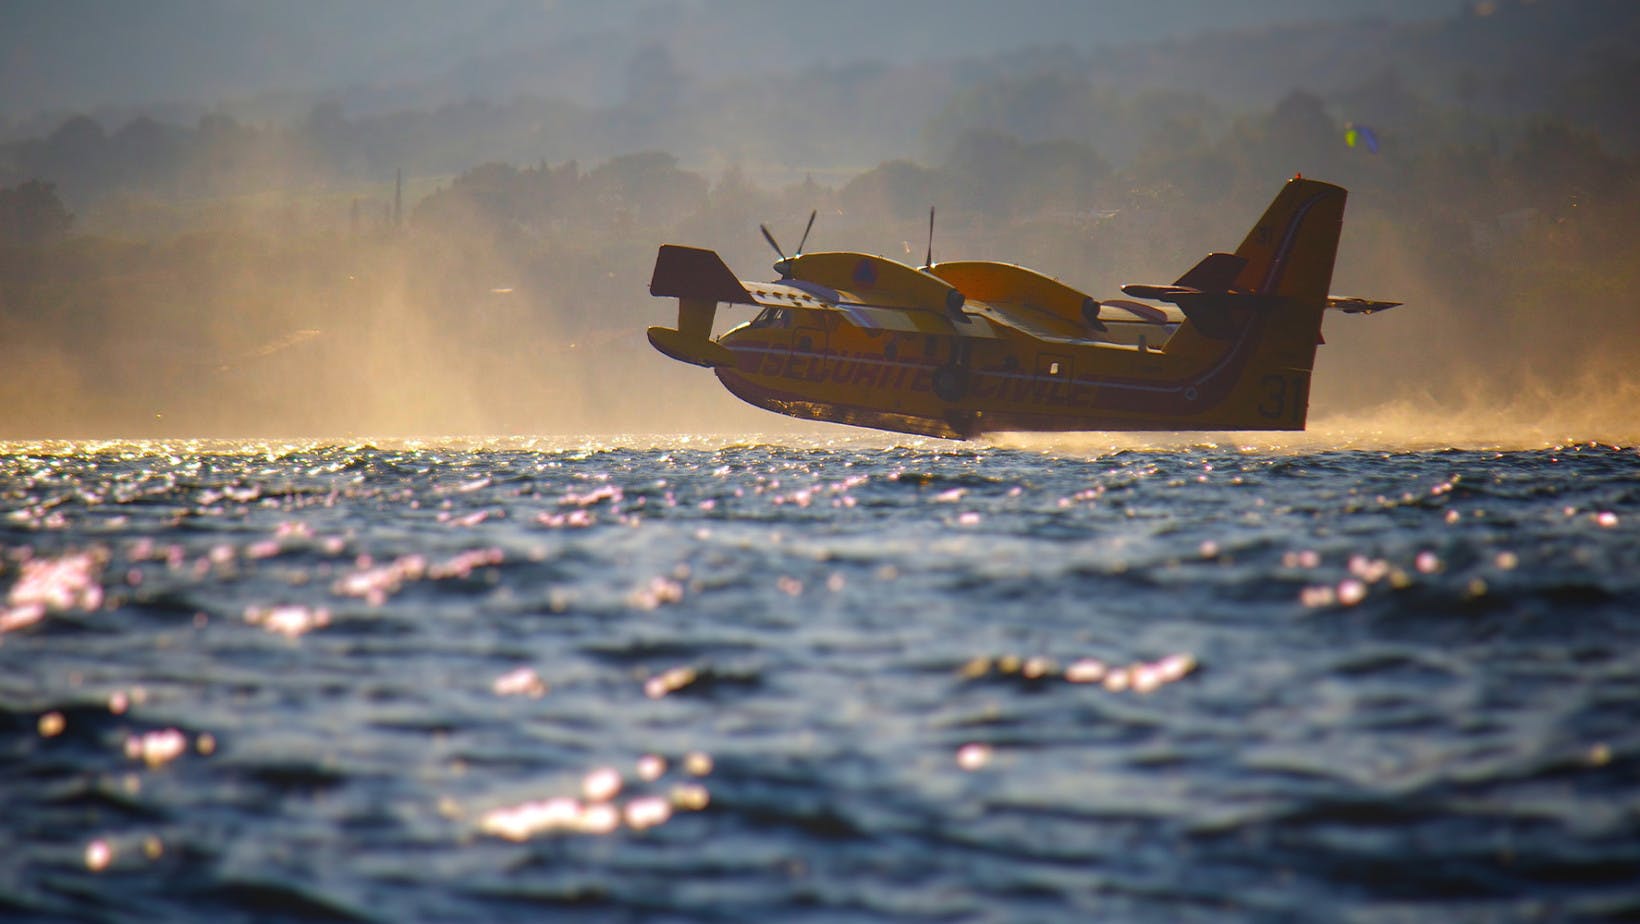 A sea plane flying right over the surface of water which represents the fundamental theorem of calculus